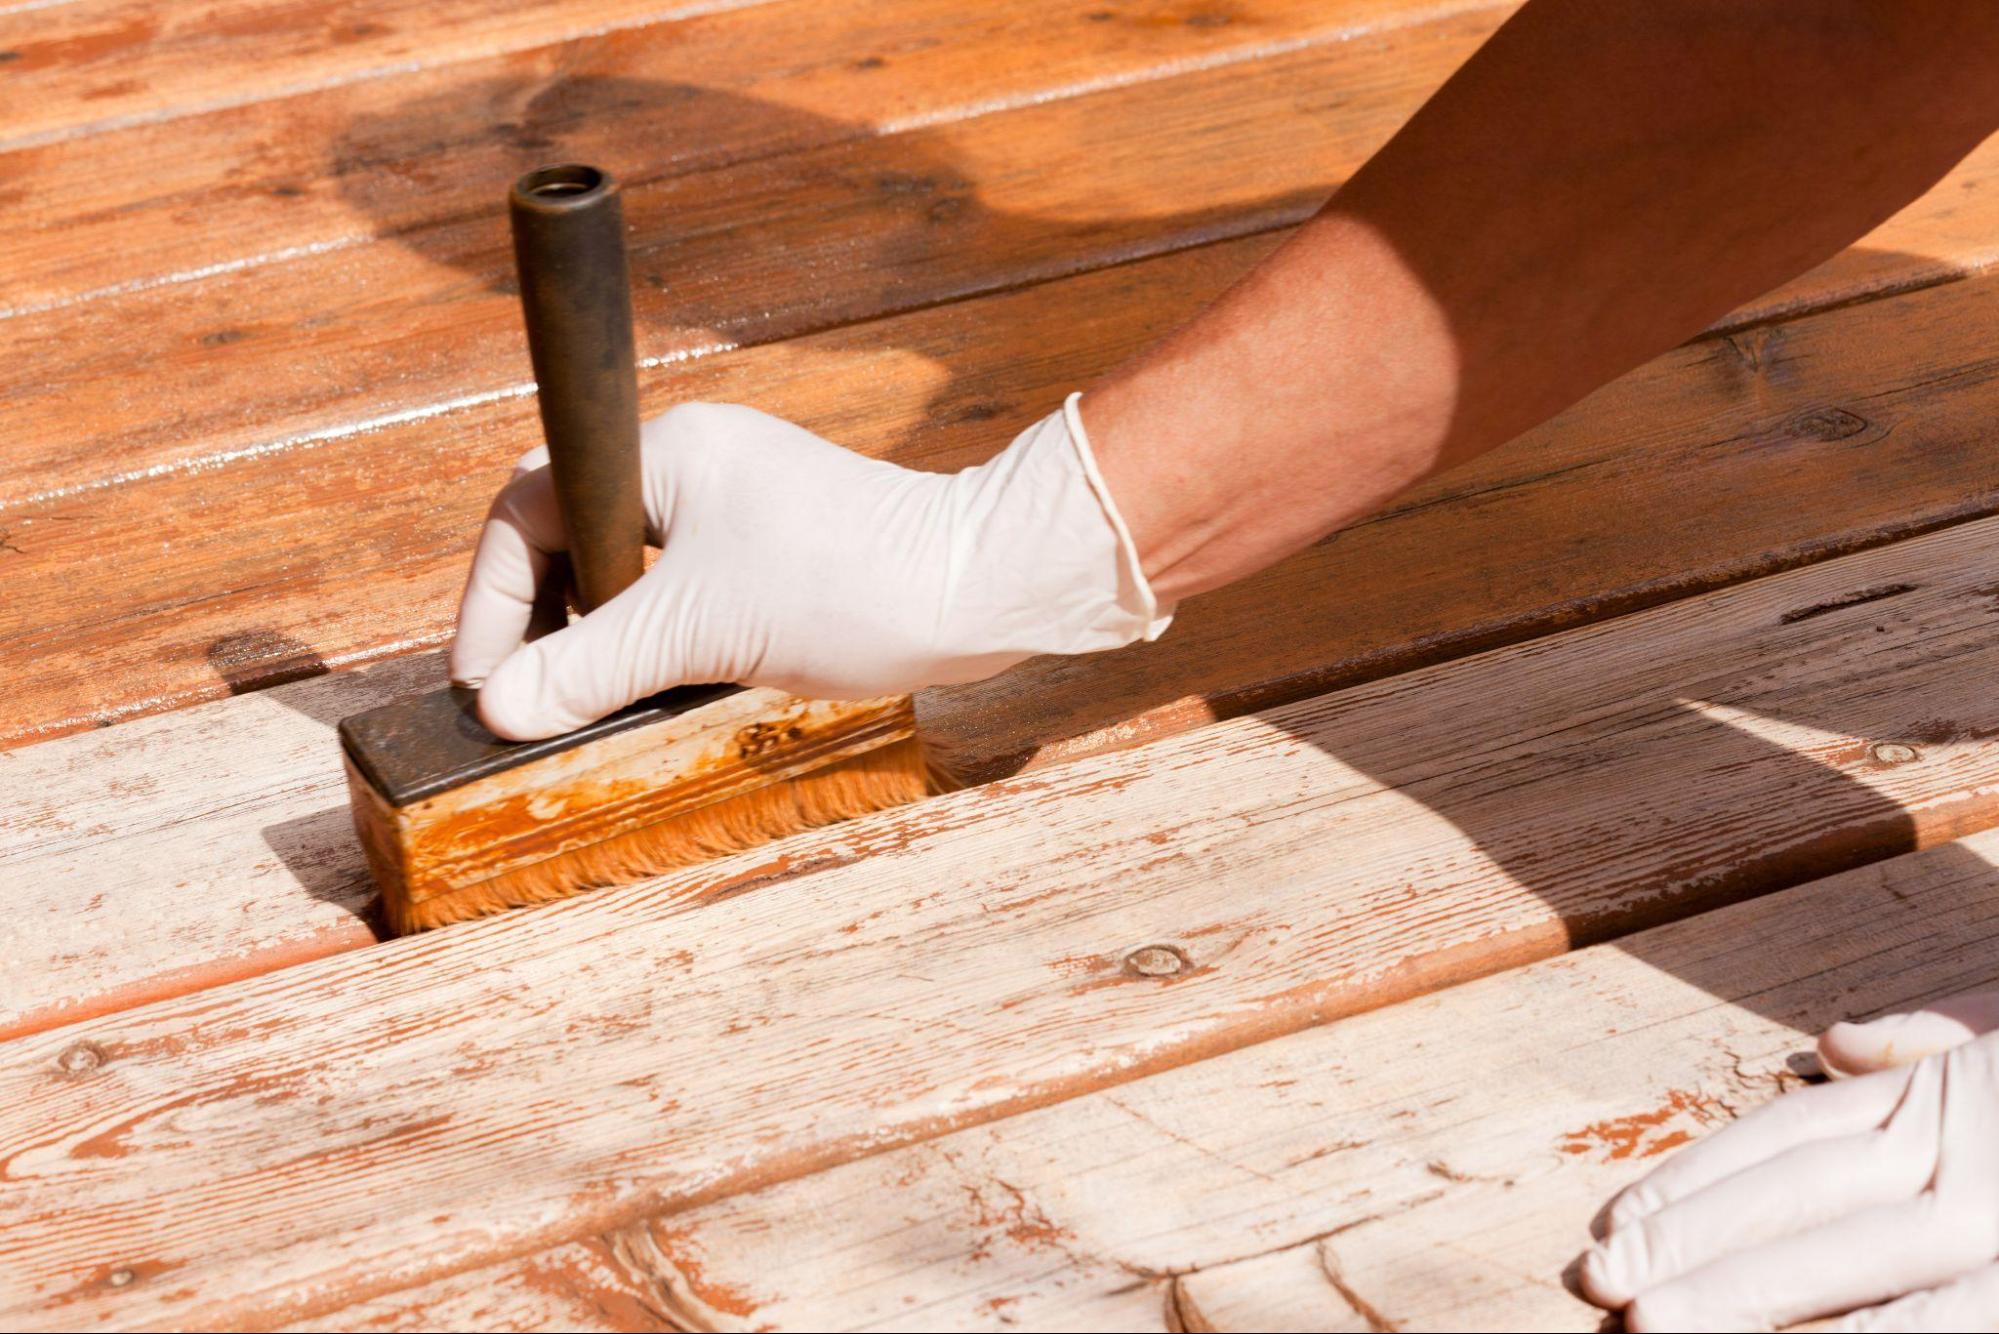 5 tips to maintain your outdoor decking - 5 Tips to Maintain Your Outdoor Decking